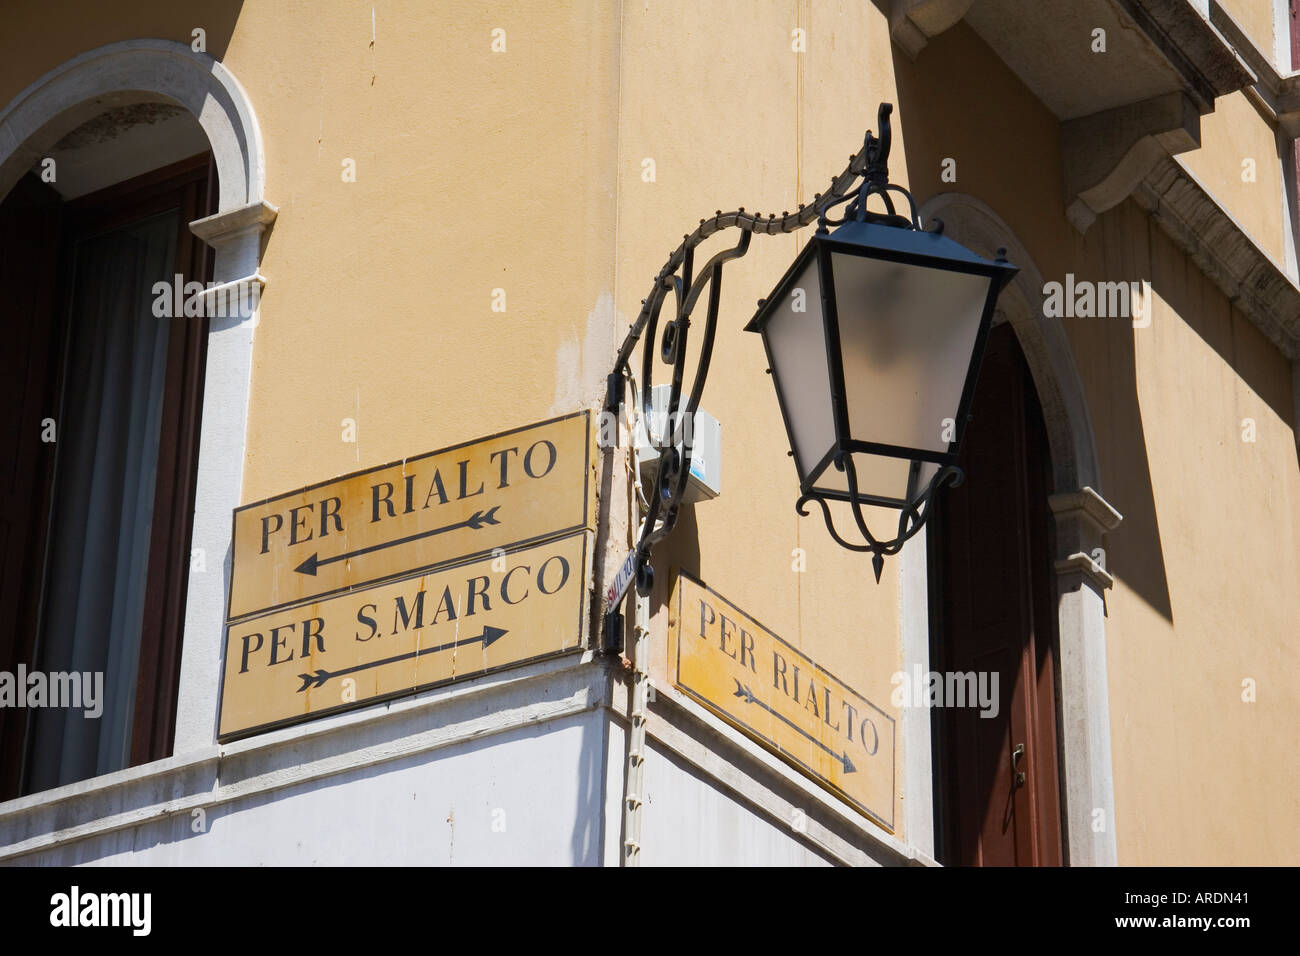 Per Rialto and Per S Marco direction signs on corner of building Venice Italy Stock Photo